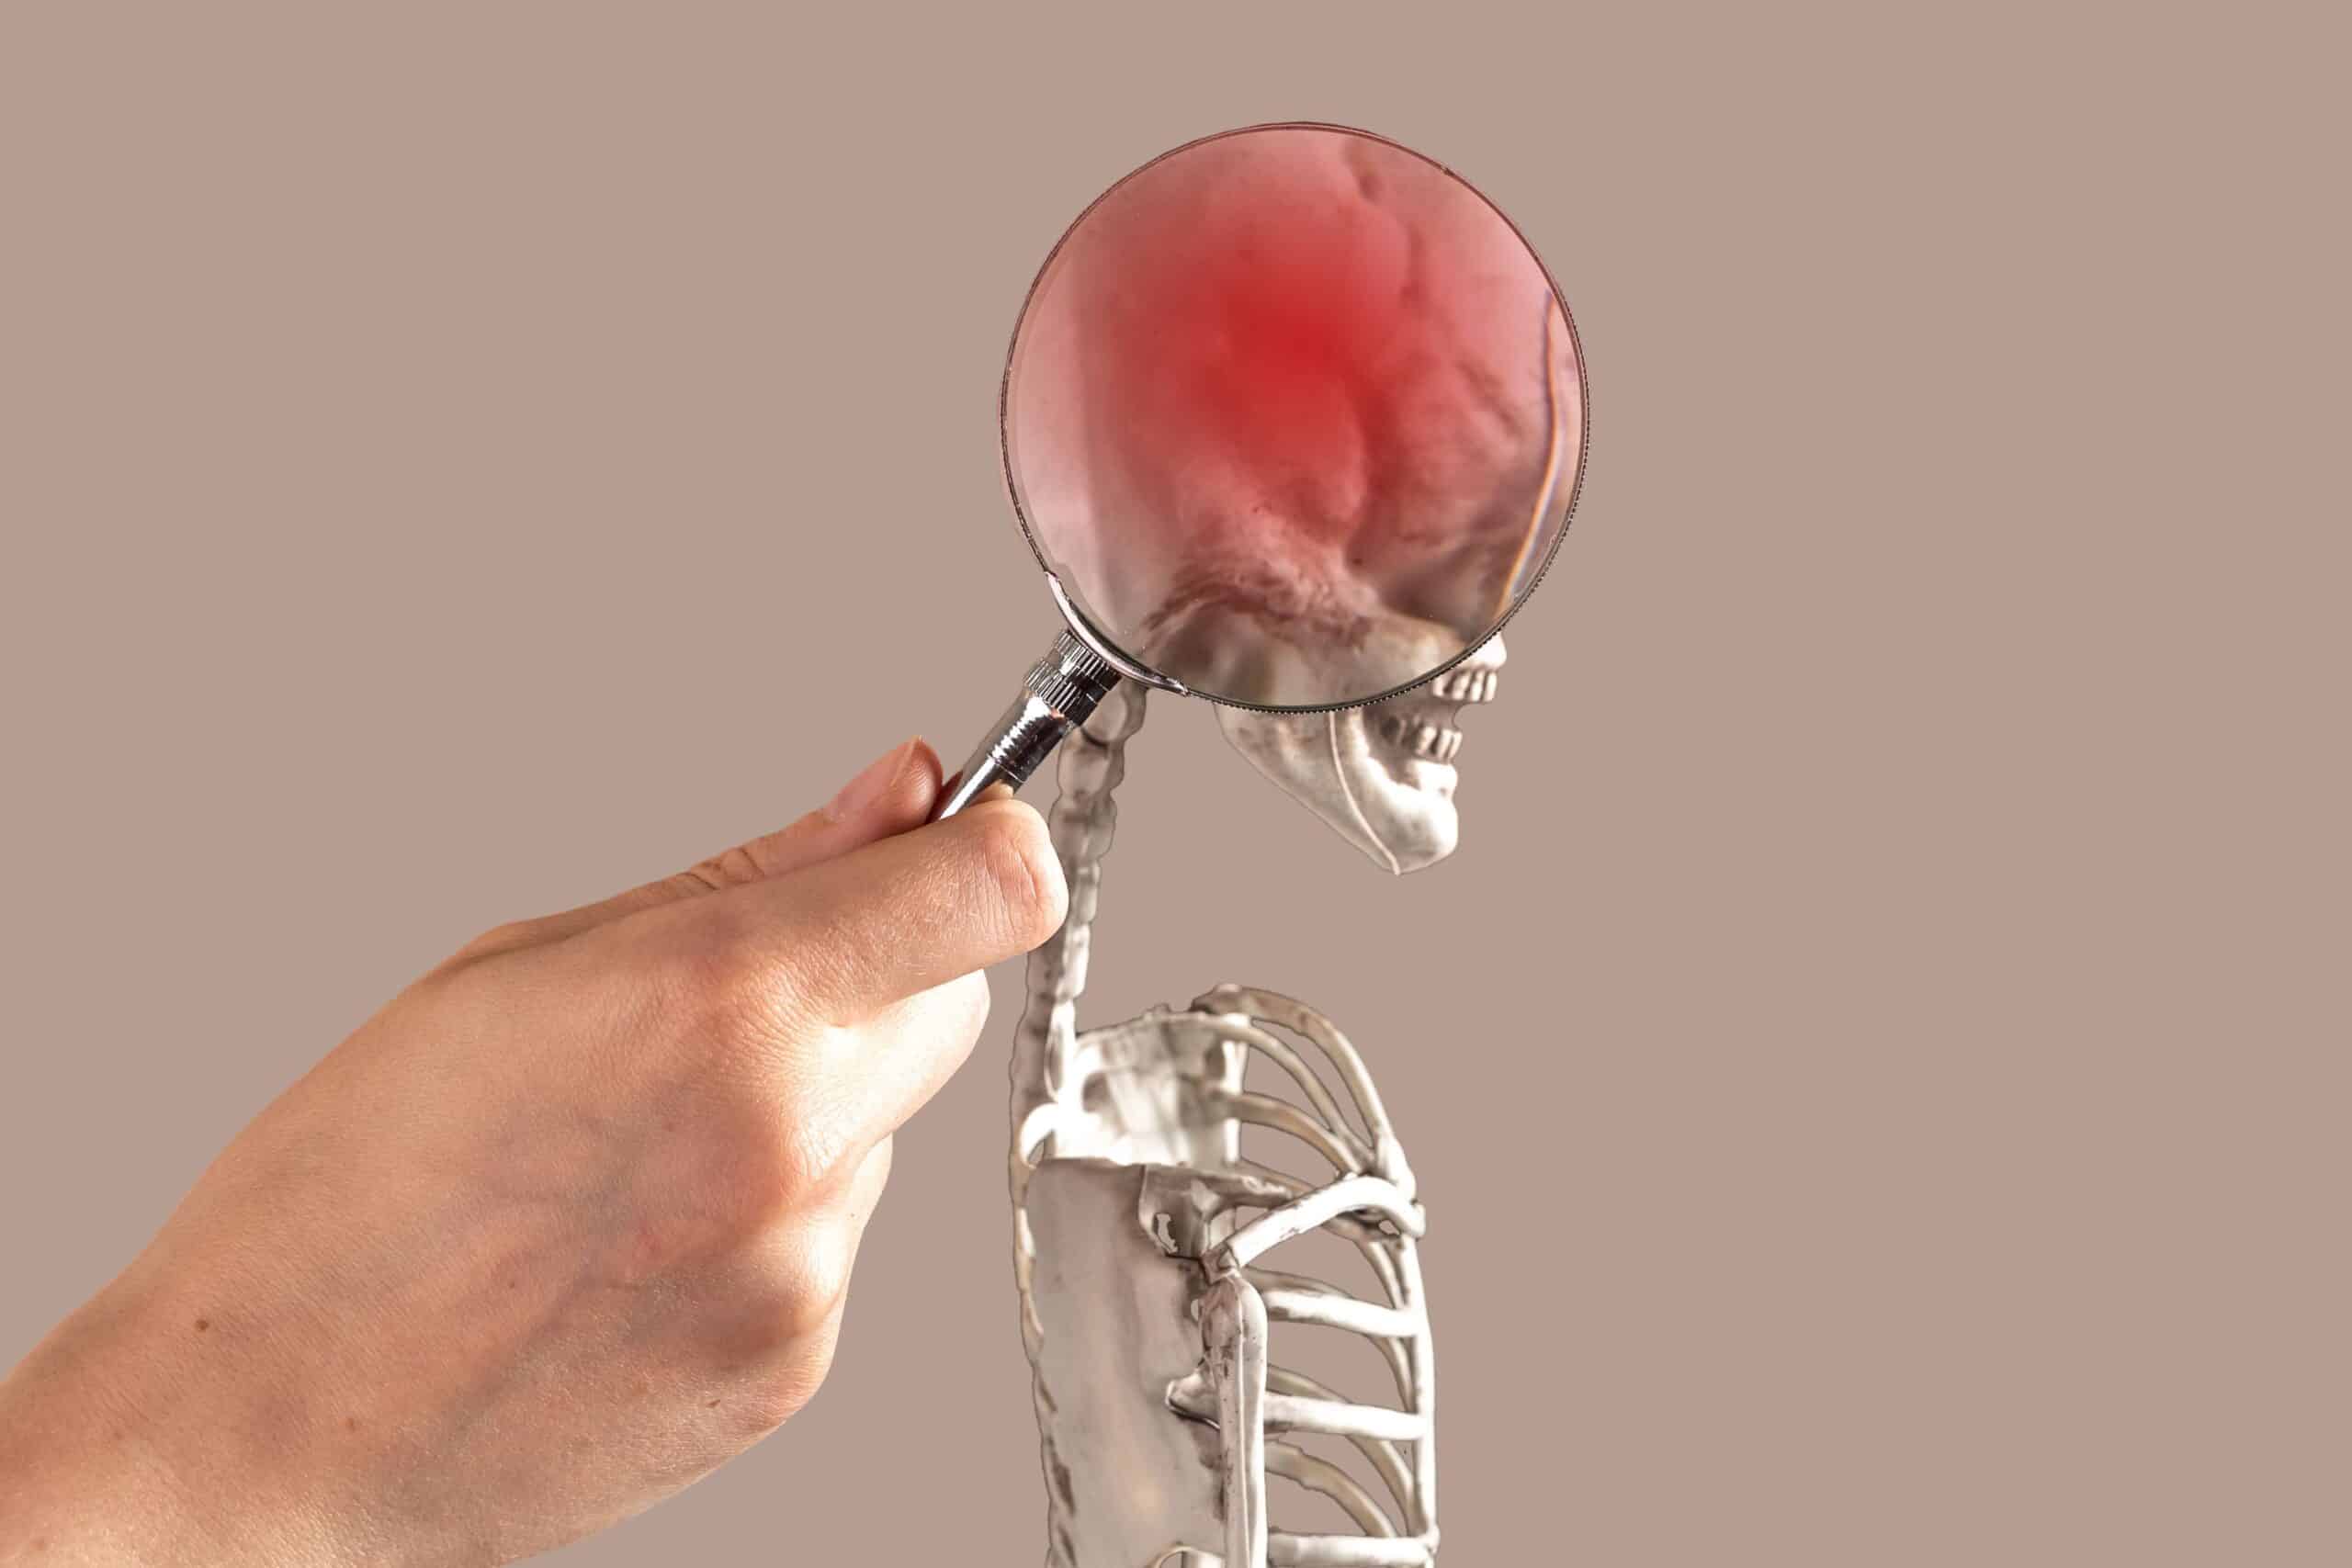 Brain Injuries in Minnesota: The Legal Rights of Victims and Pursuing Compensation